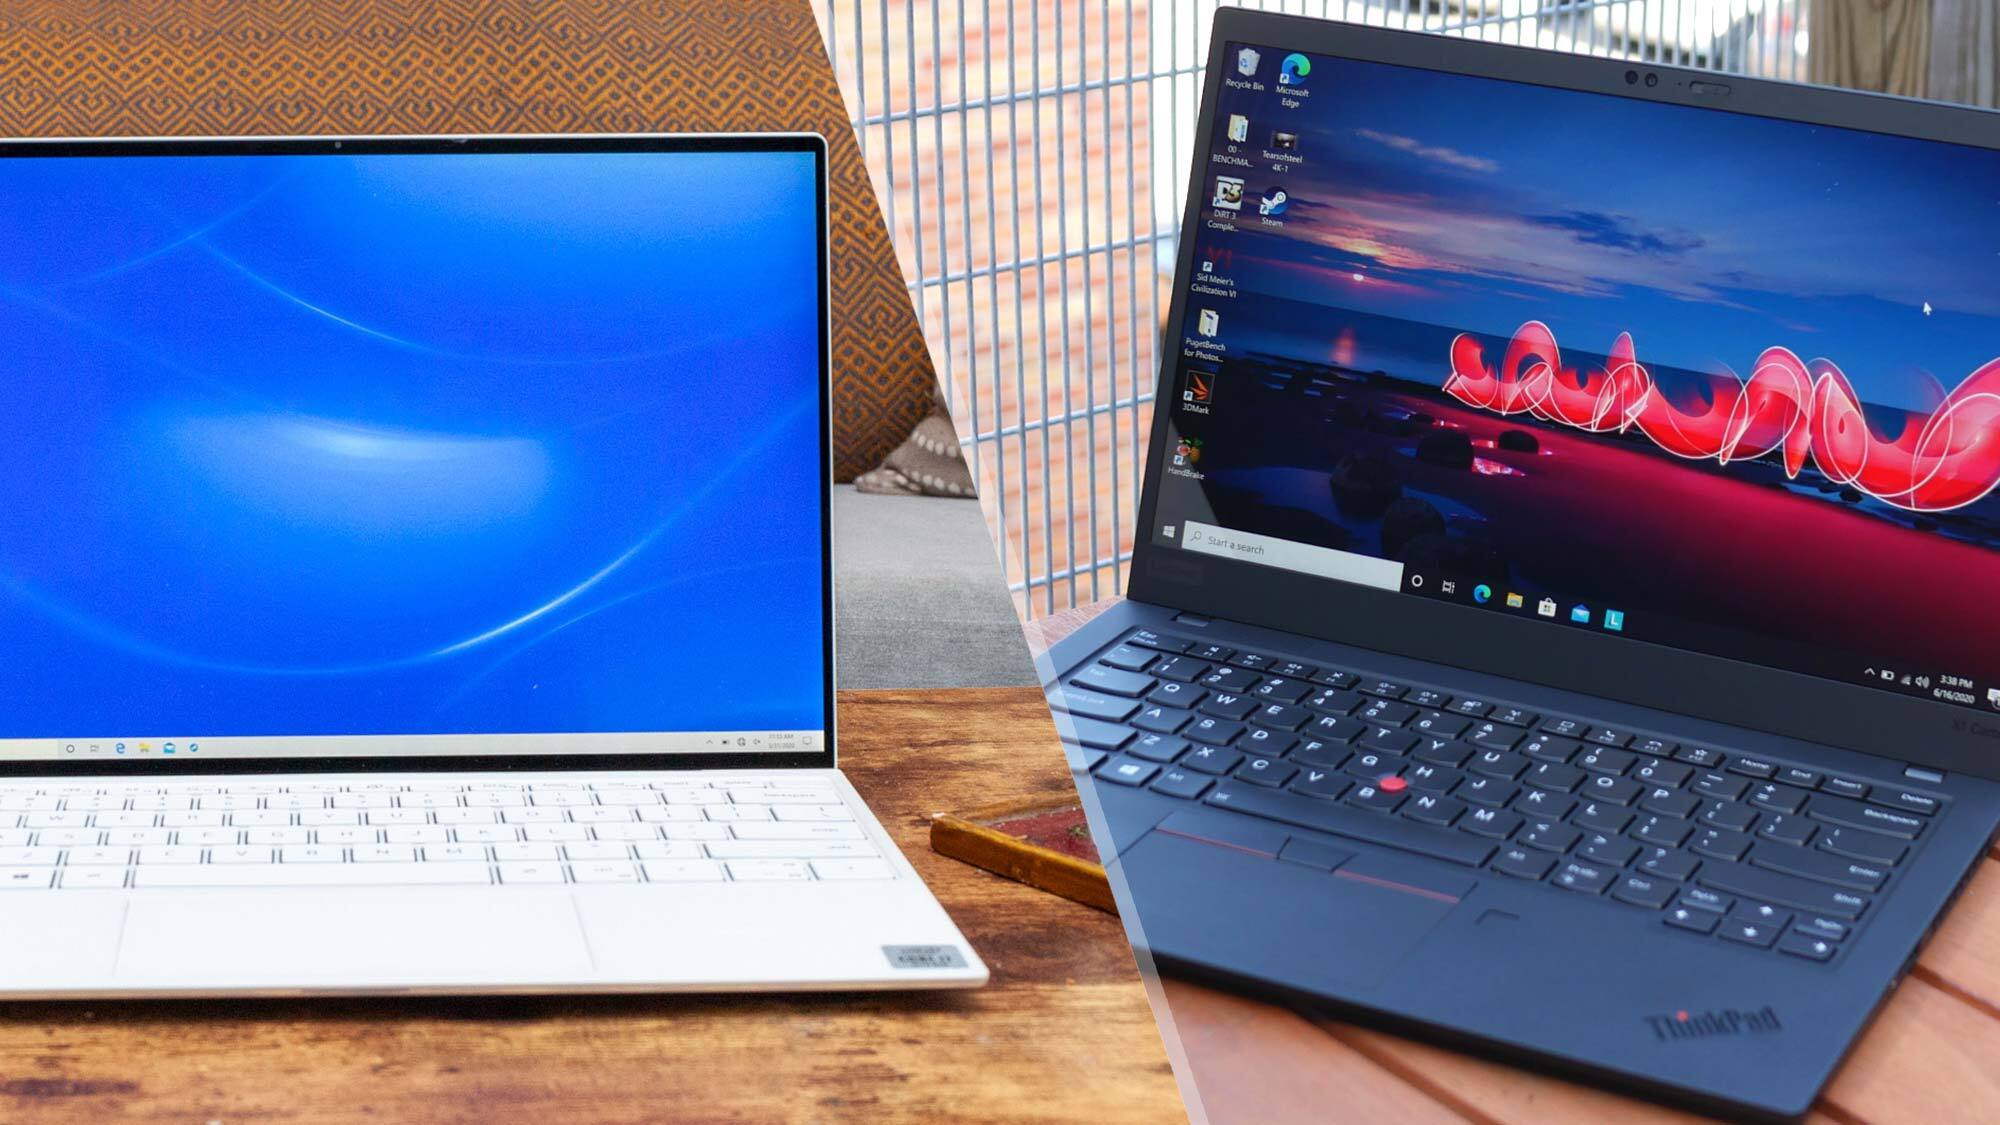 Lenovo ThinkPad X1 Carbon vs. Dell XPS 13: Which flagship wins